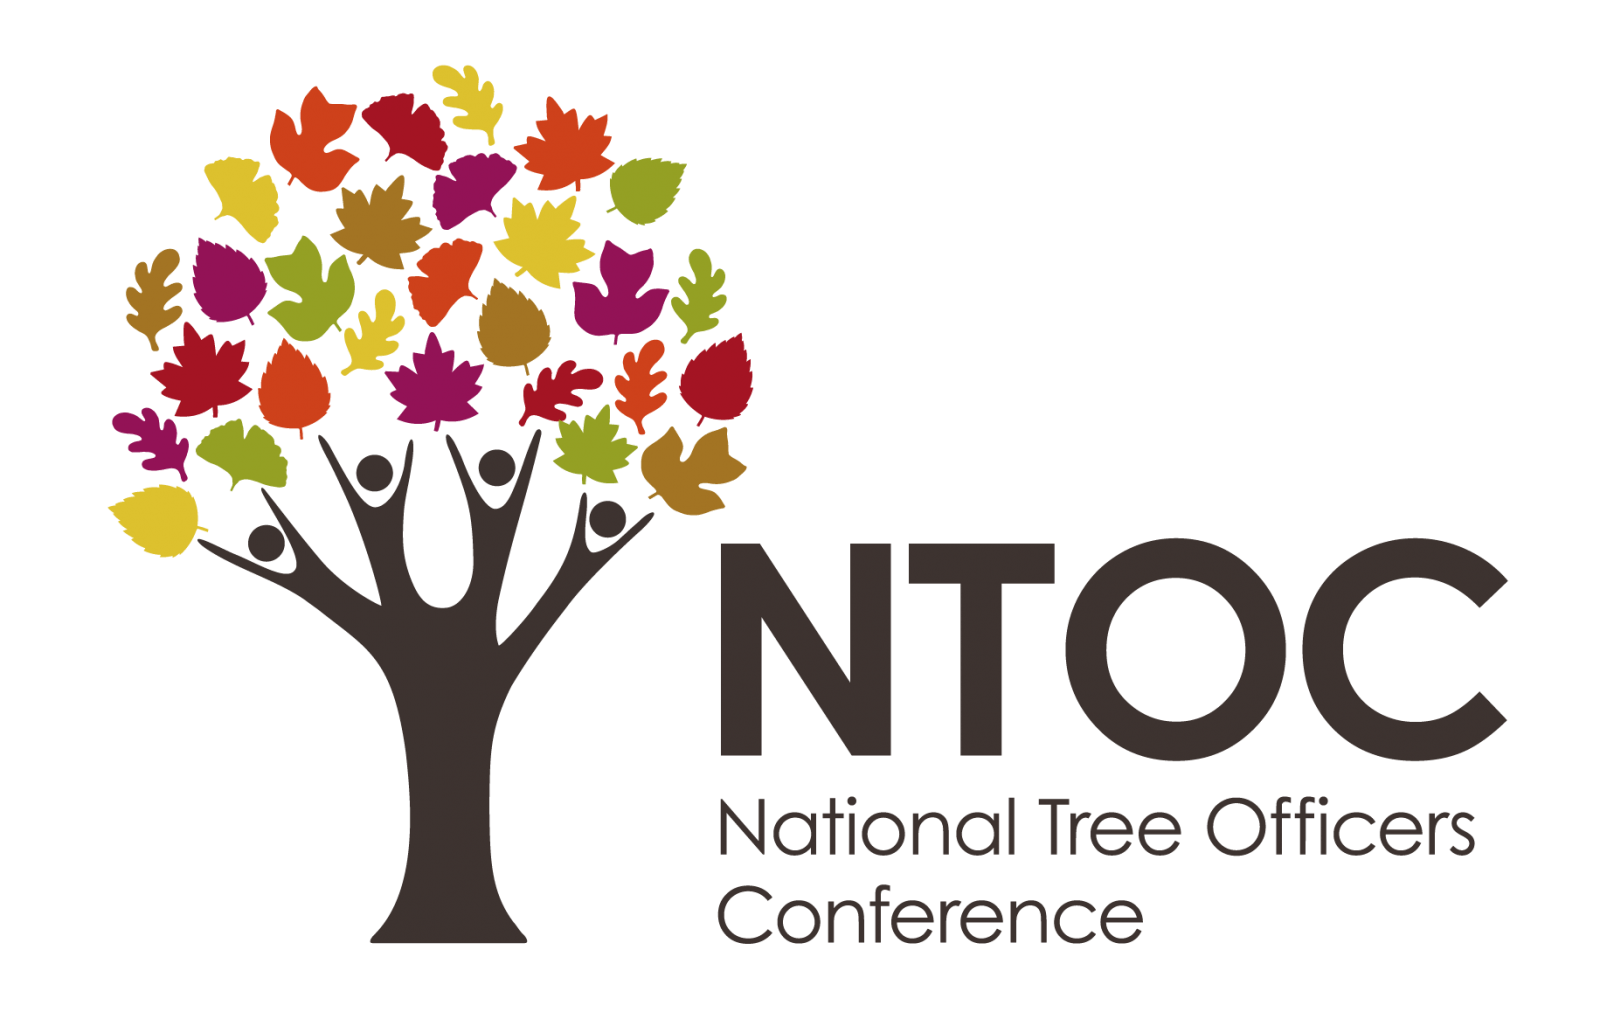 Vibrant Logo - National Tree Officers Conference launches vibrant logo - Institute ...